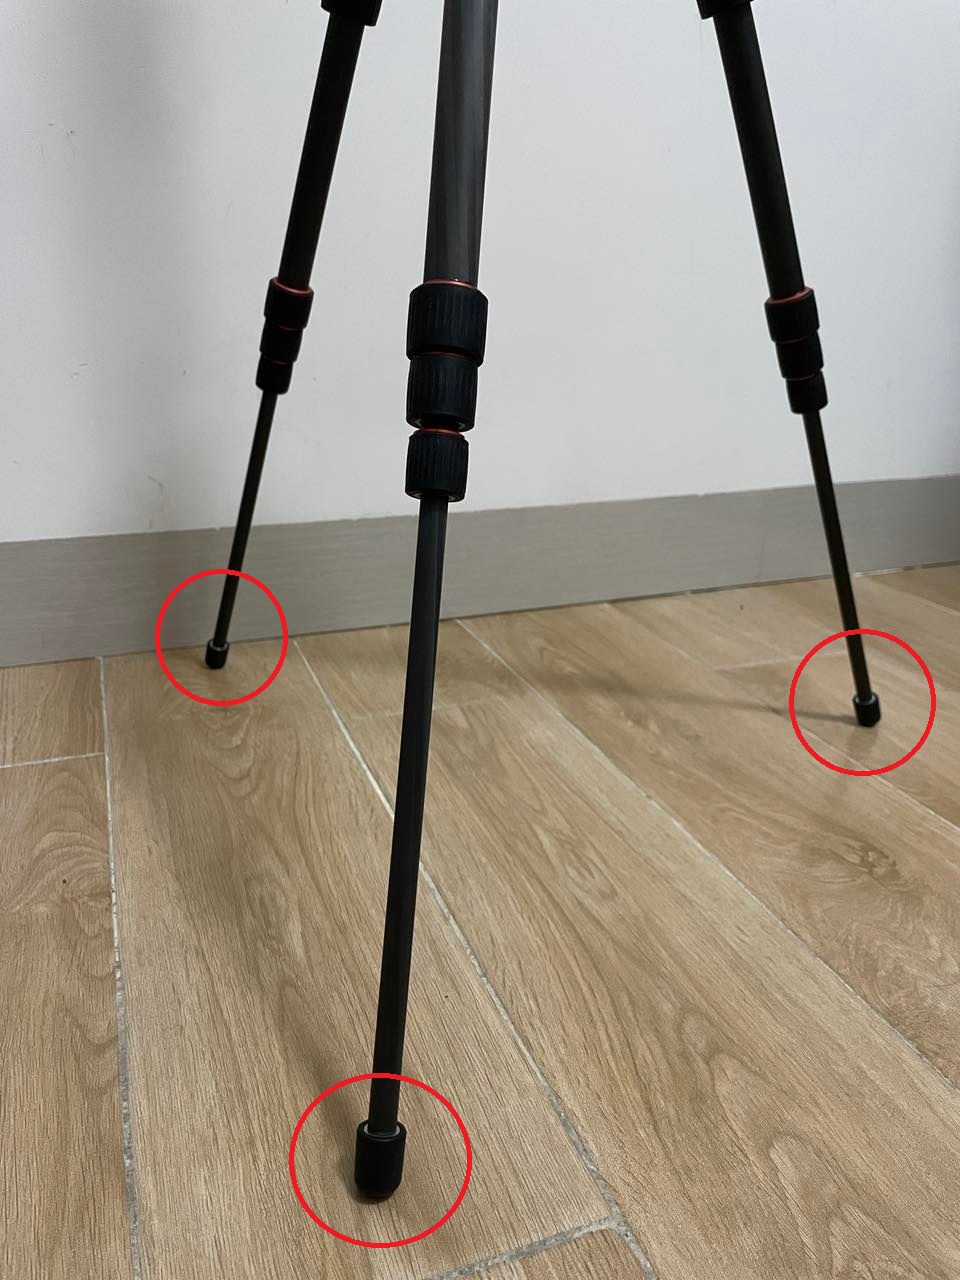 How to Use a Camera Tripod - rubber feet